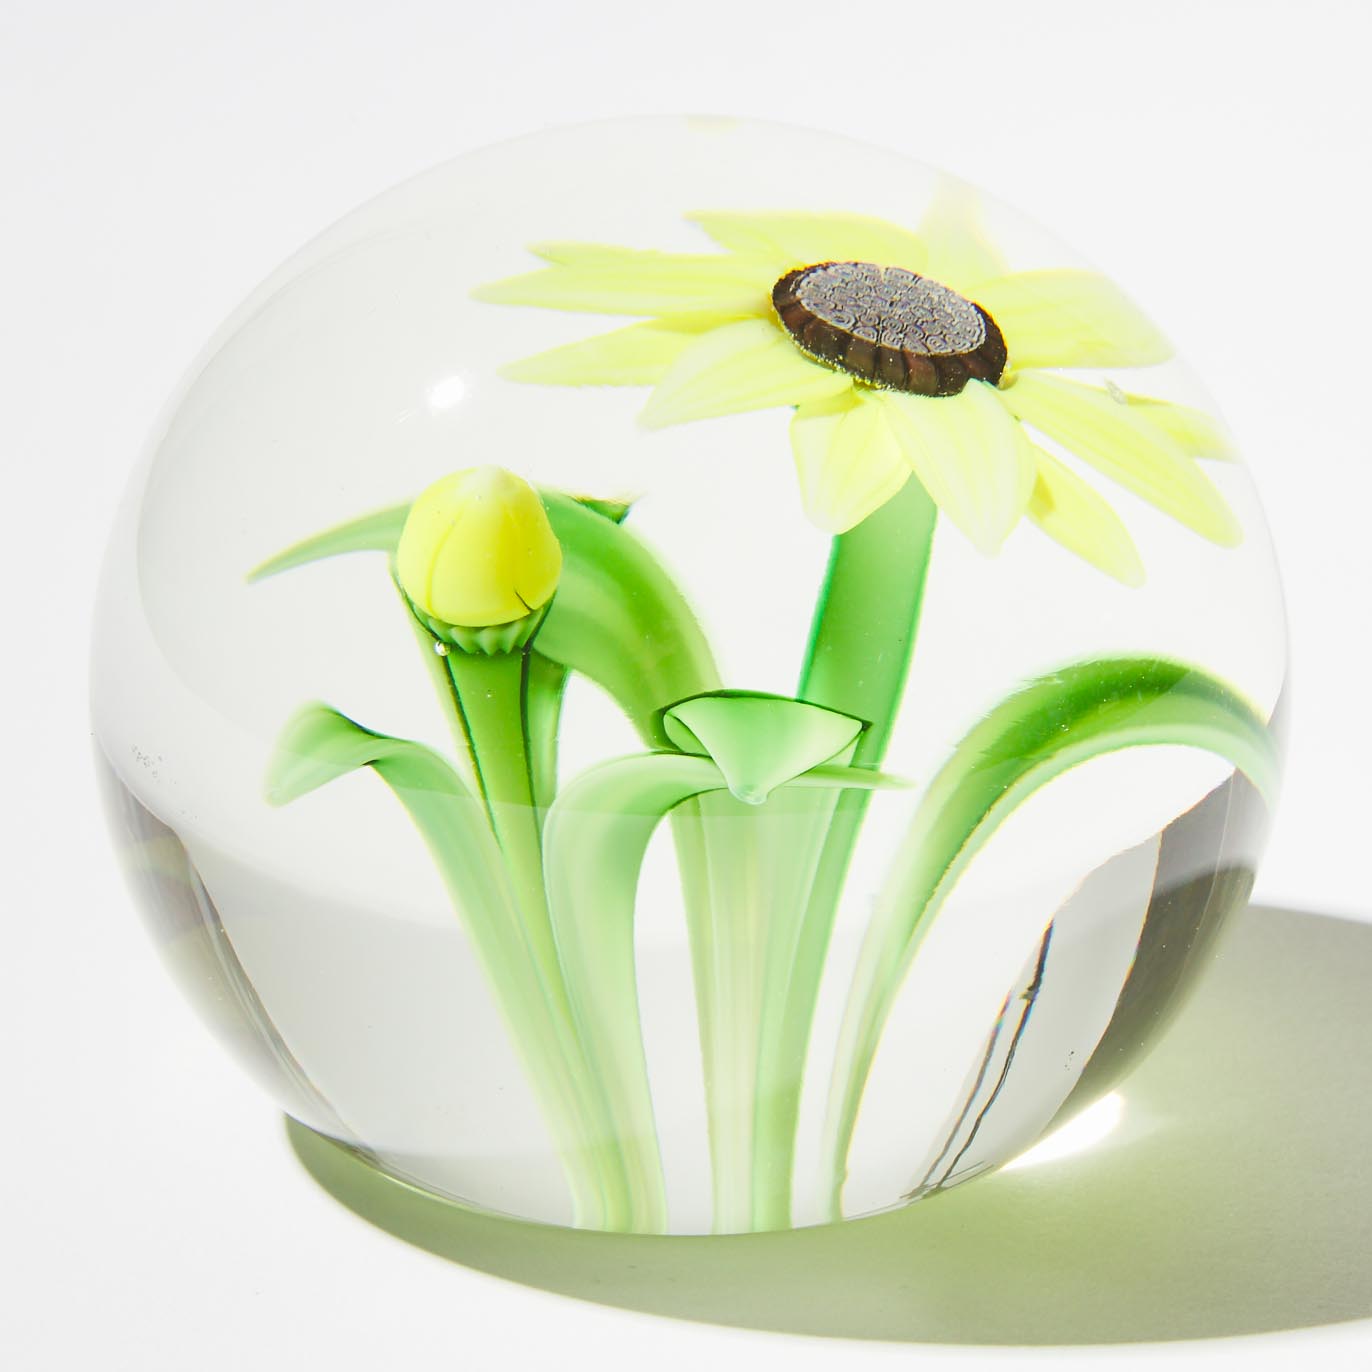 Bruce Sillars (American), Black-Eyed Susan Paperweight, Orient & Flume, 17/250, late 20th century